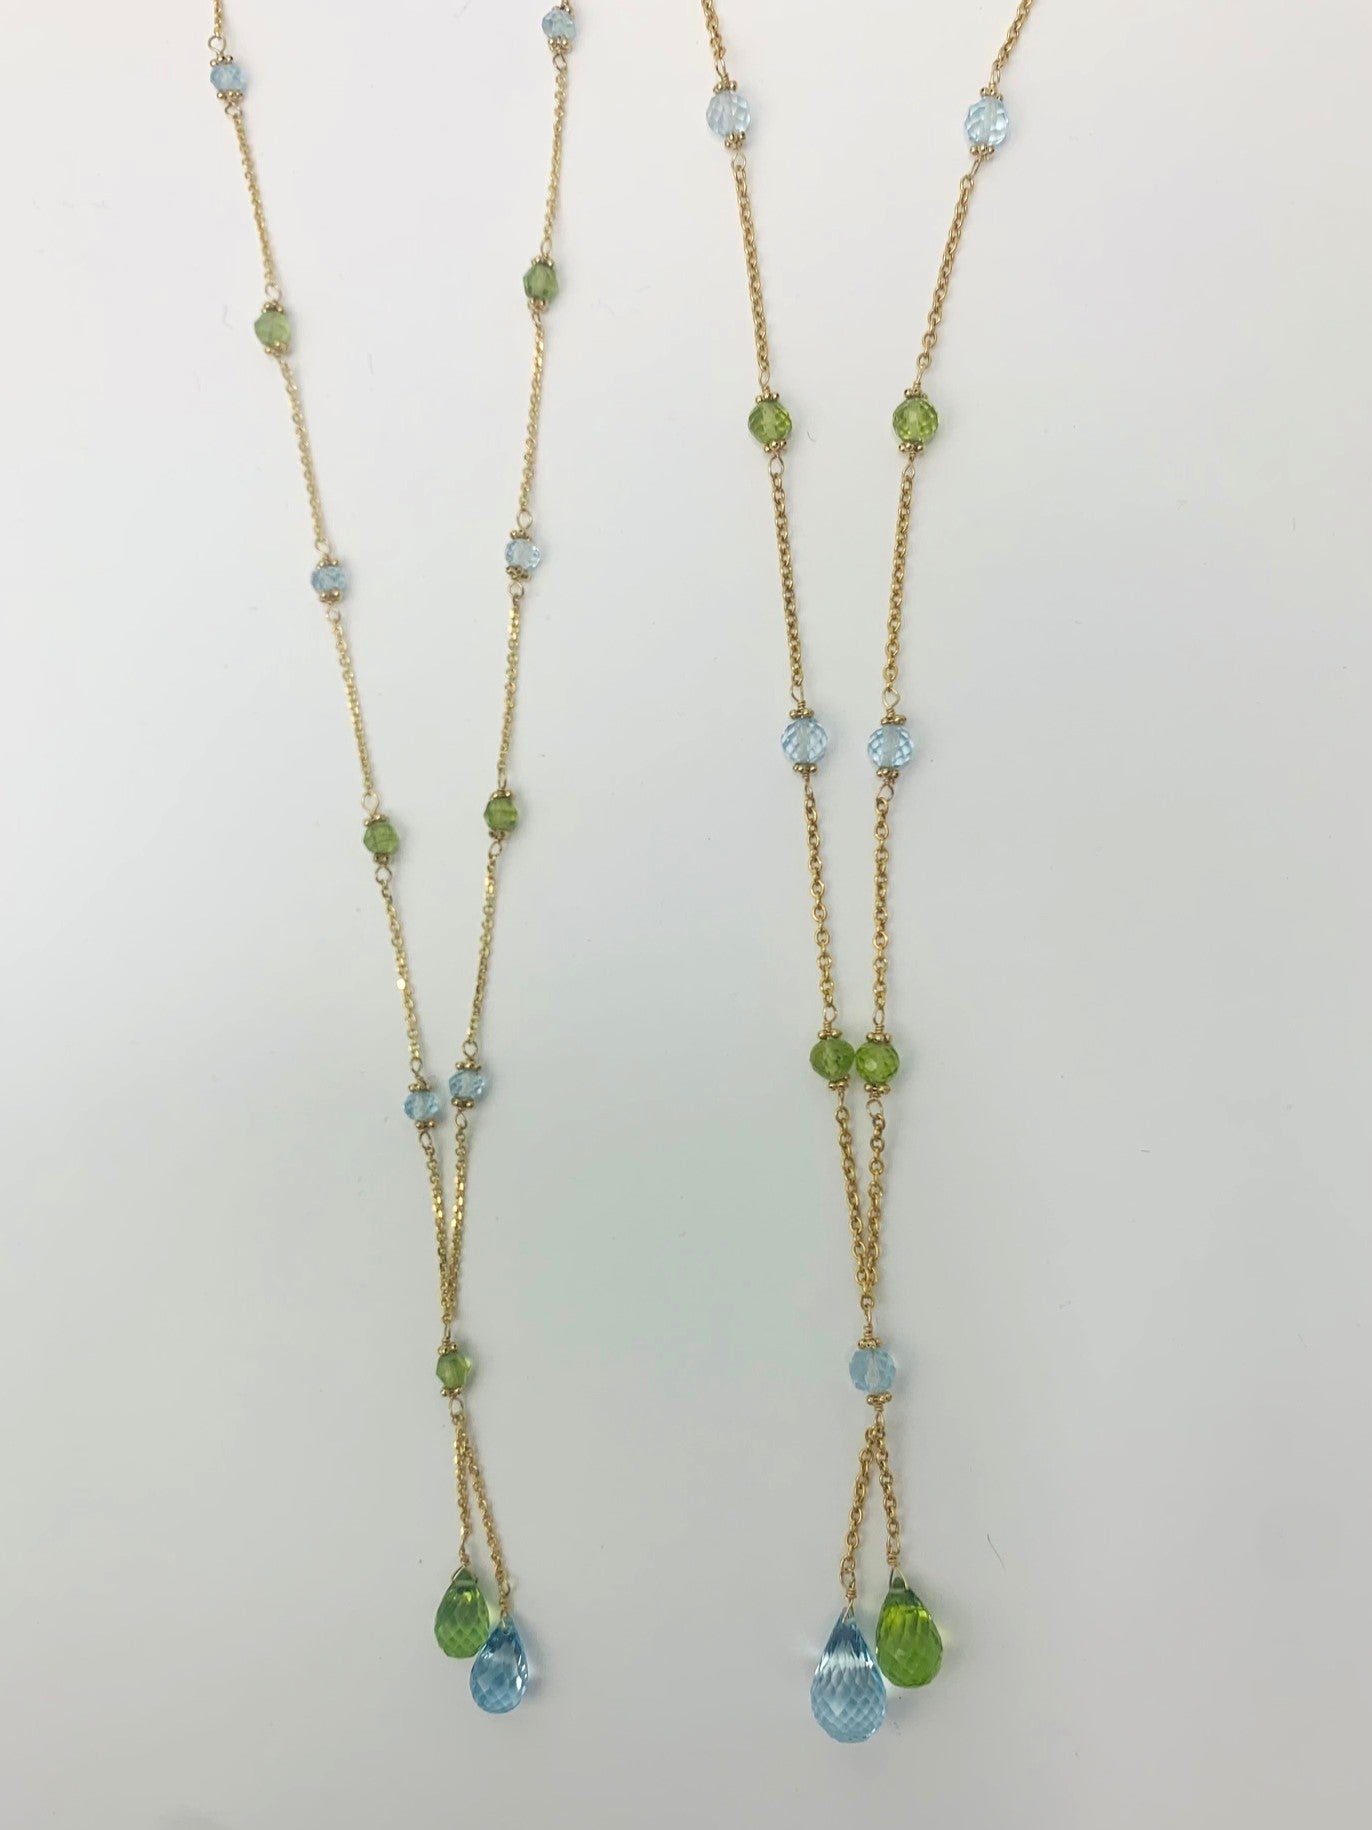 15" - 17" Peridot and Blue Topaz Lariat Necklace in 14KY - NCK-020-LARGM14Y-PDTBT-16